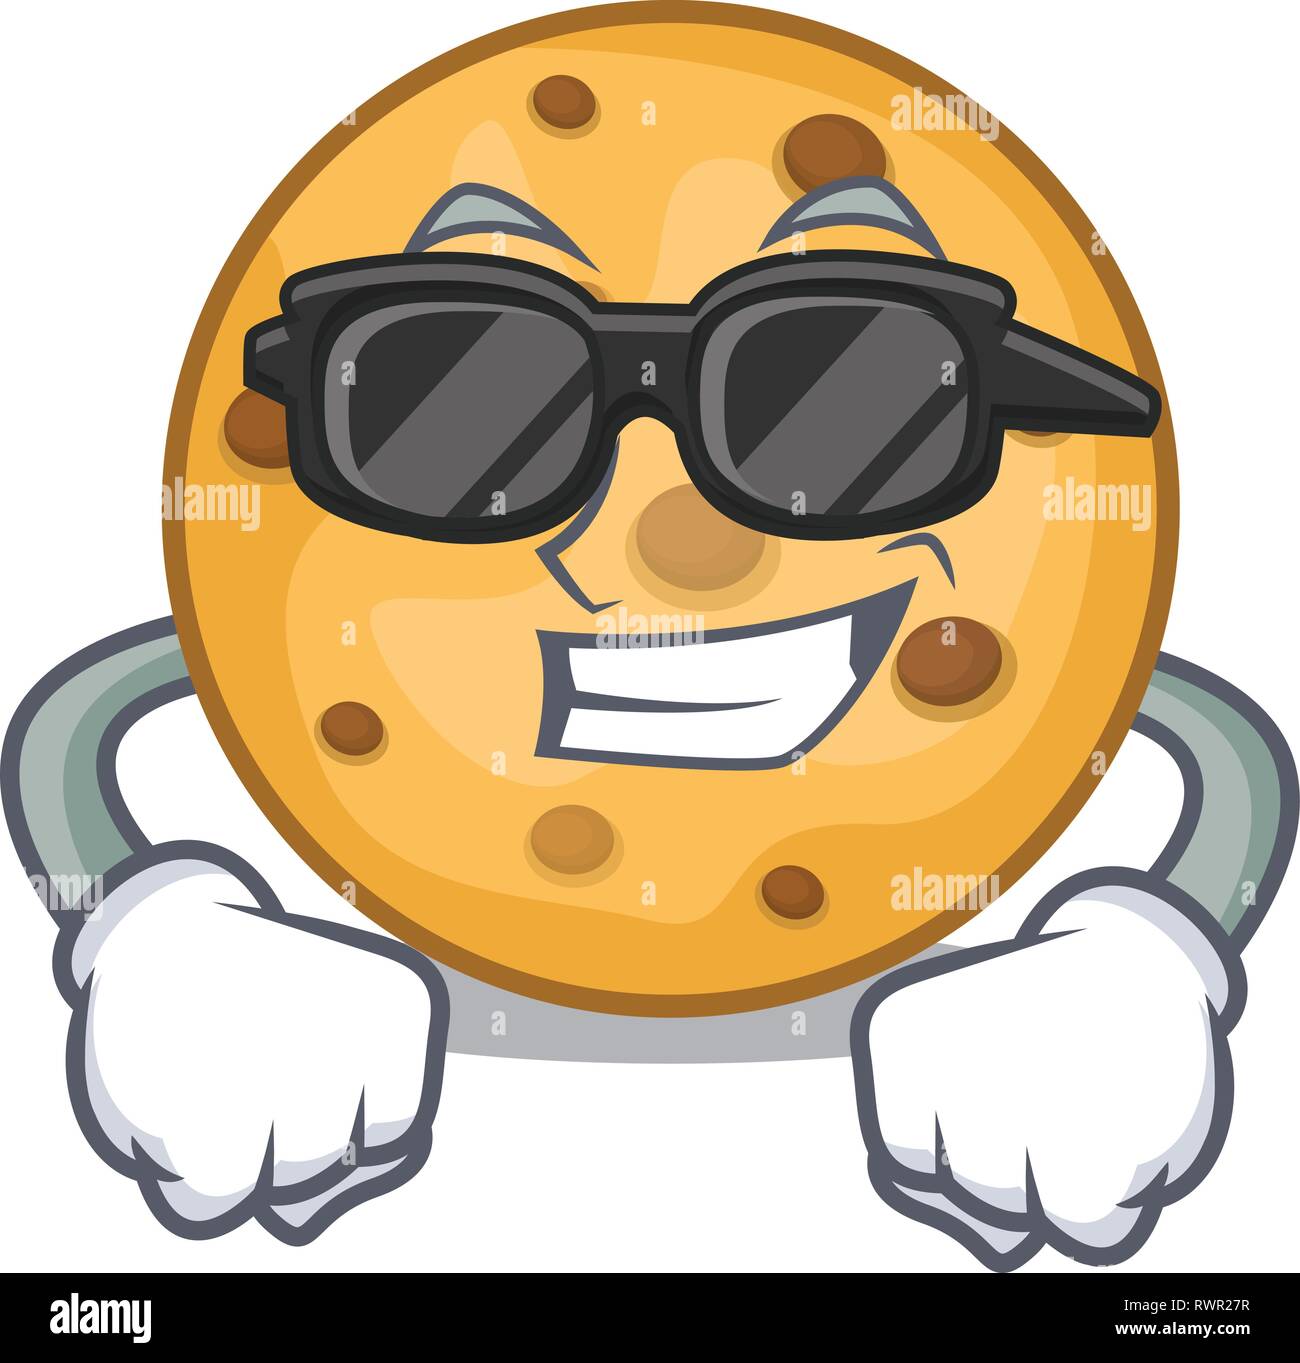 Super cool oat cookies above the mascot plate Stock Vector